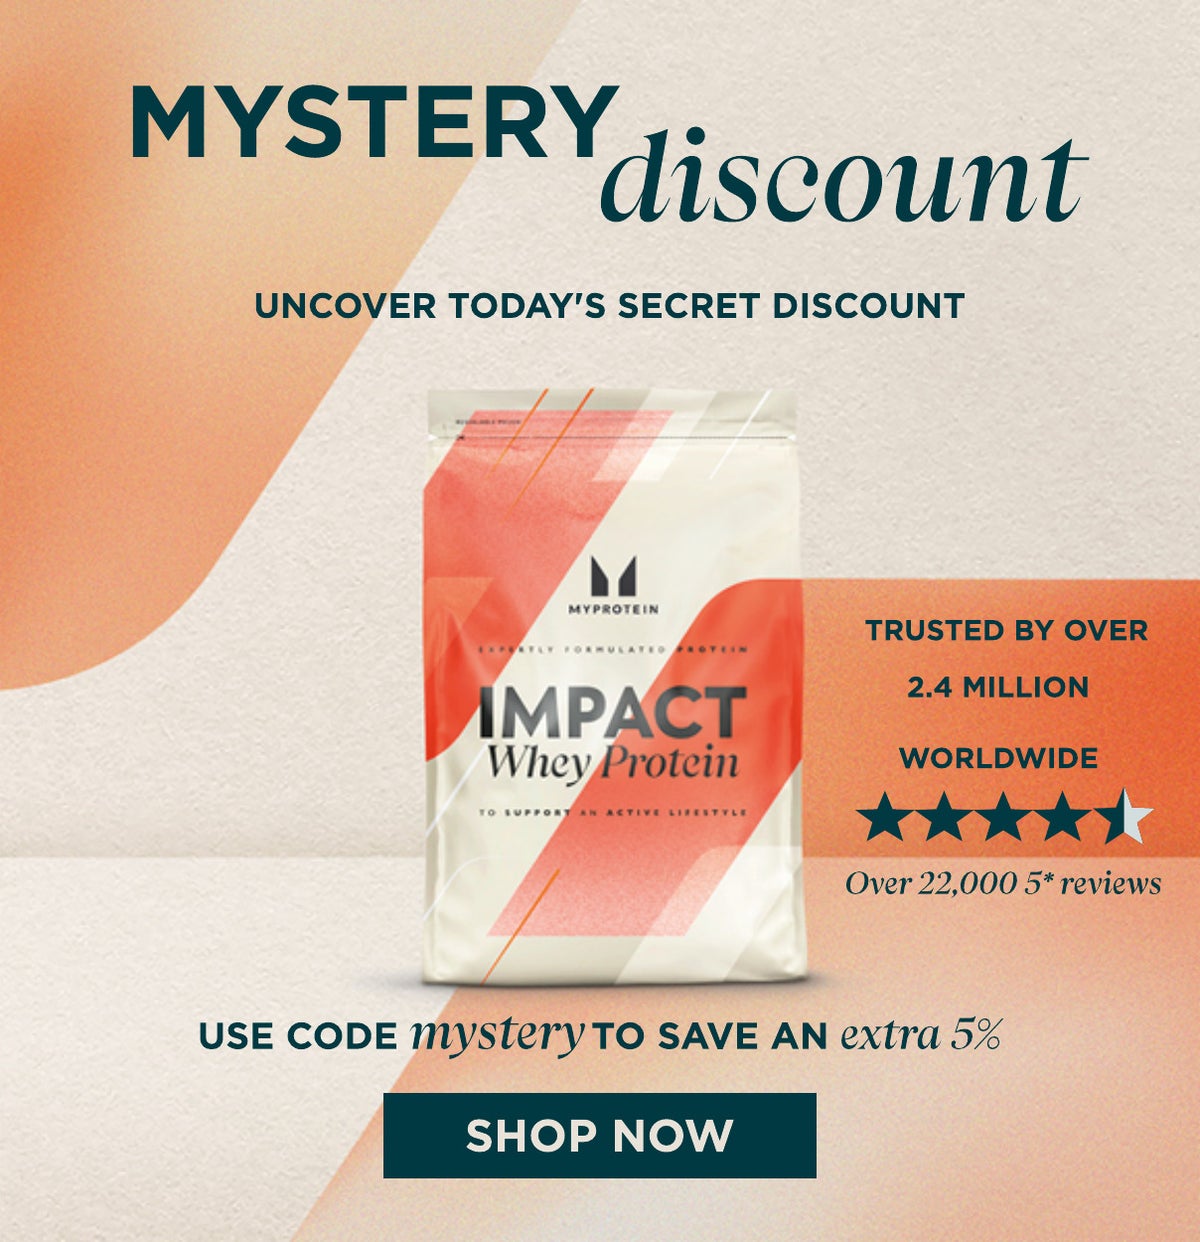 Mystery discount uncover today's secret discount at basket, plus save an extra 5% with code mystery. shop now.